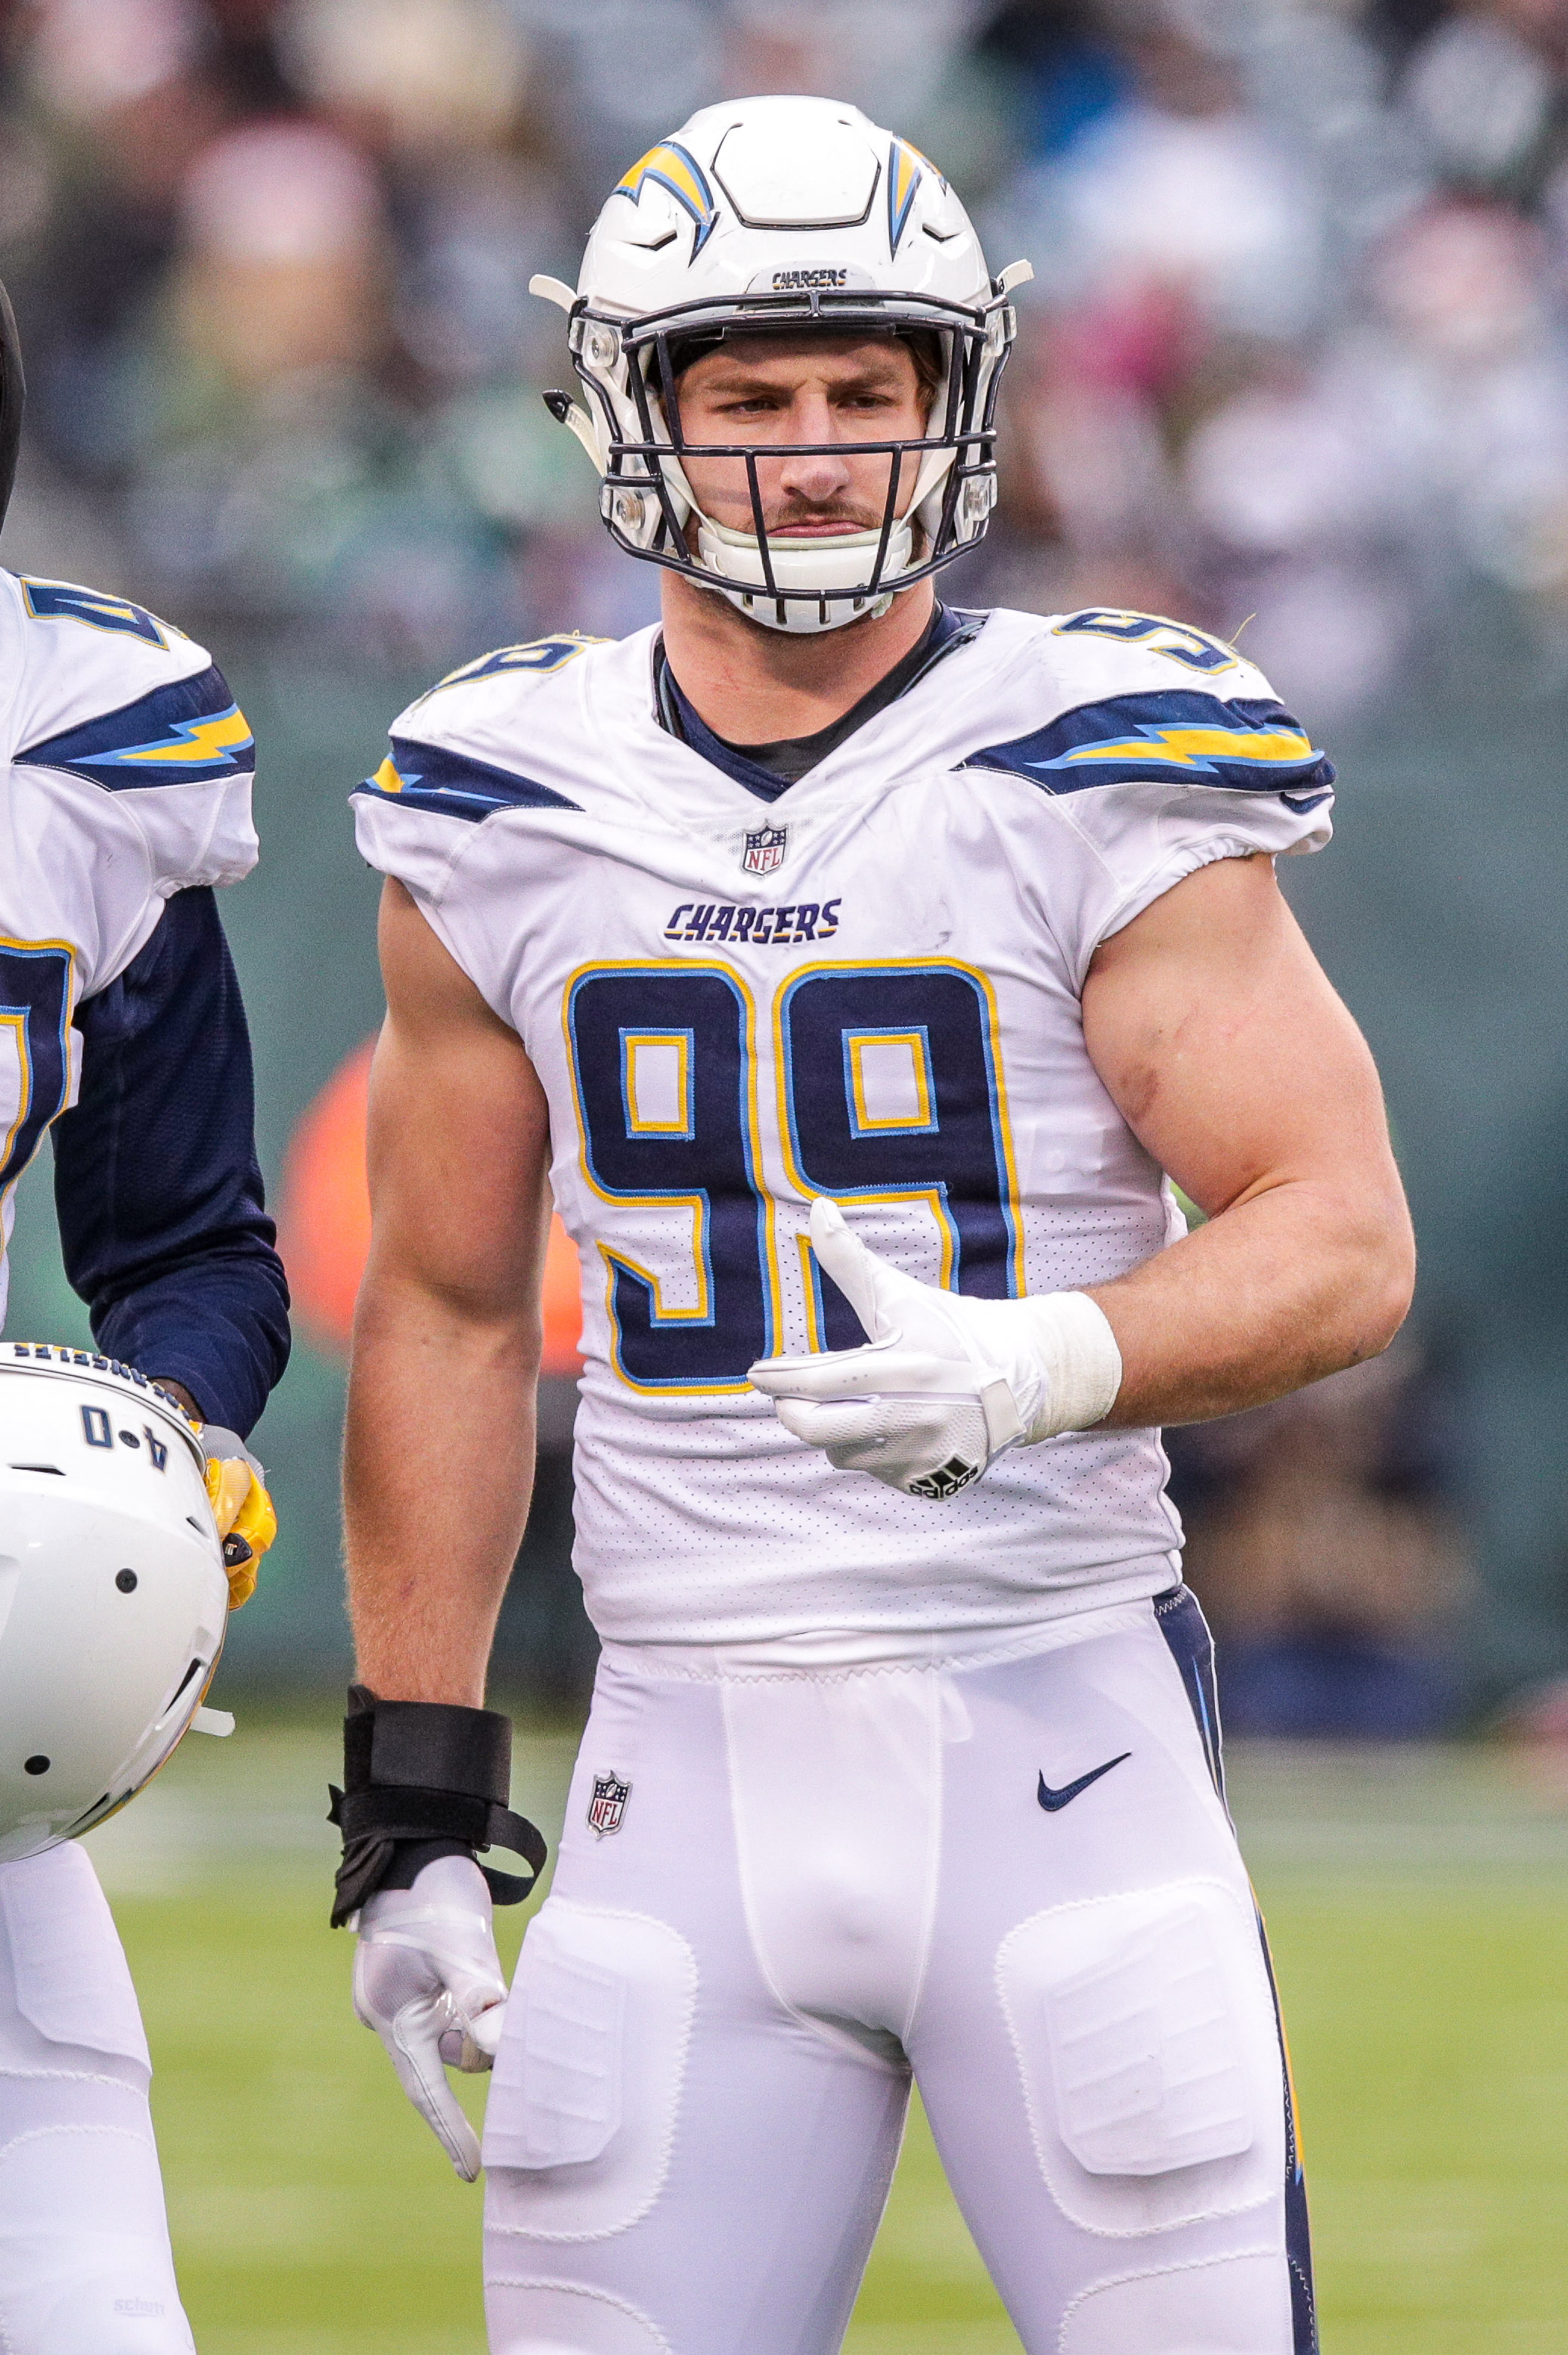 Inside NFL star Joey Bosa's bulked up body transformation with